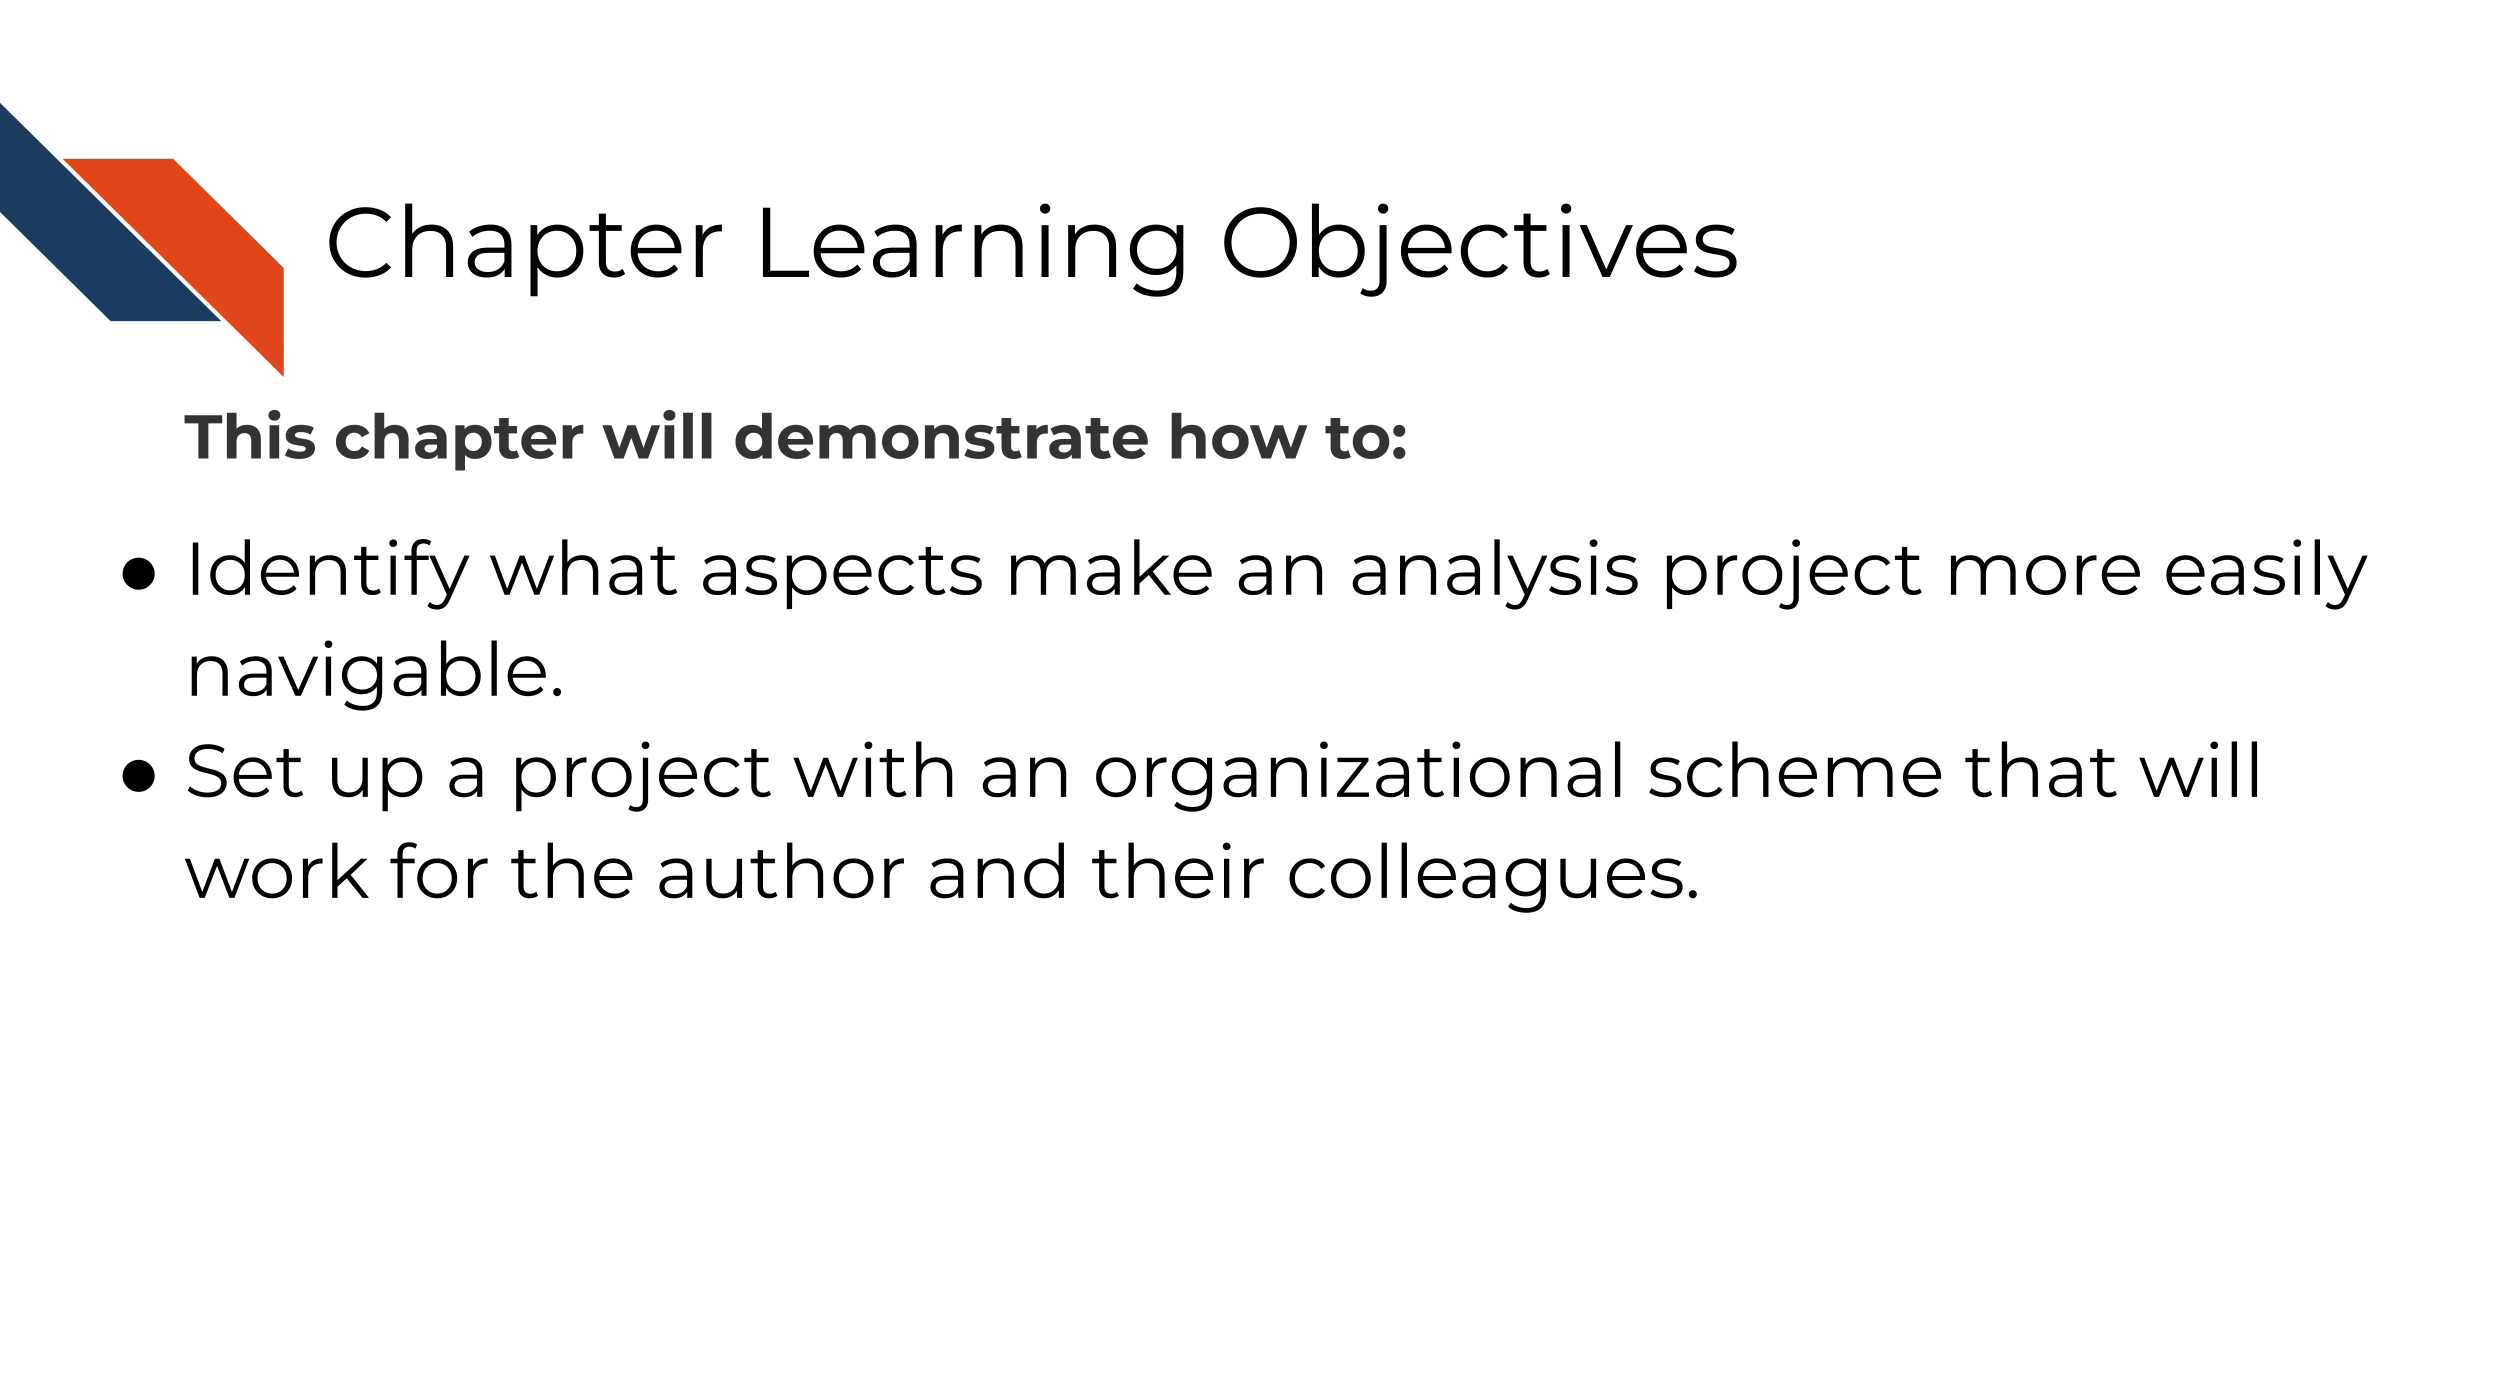 This chapter will demonstrate how to: Identify what aspects make an analysis project more easily navigable. Set up a project with an organizational scheme that will work for the author and their colleagues.